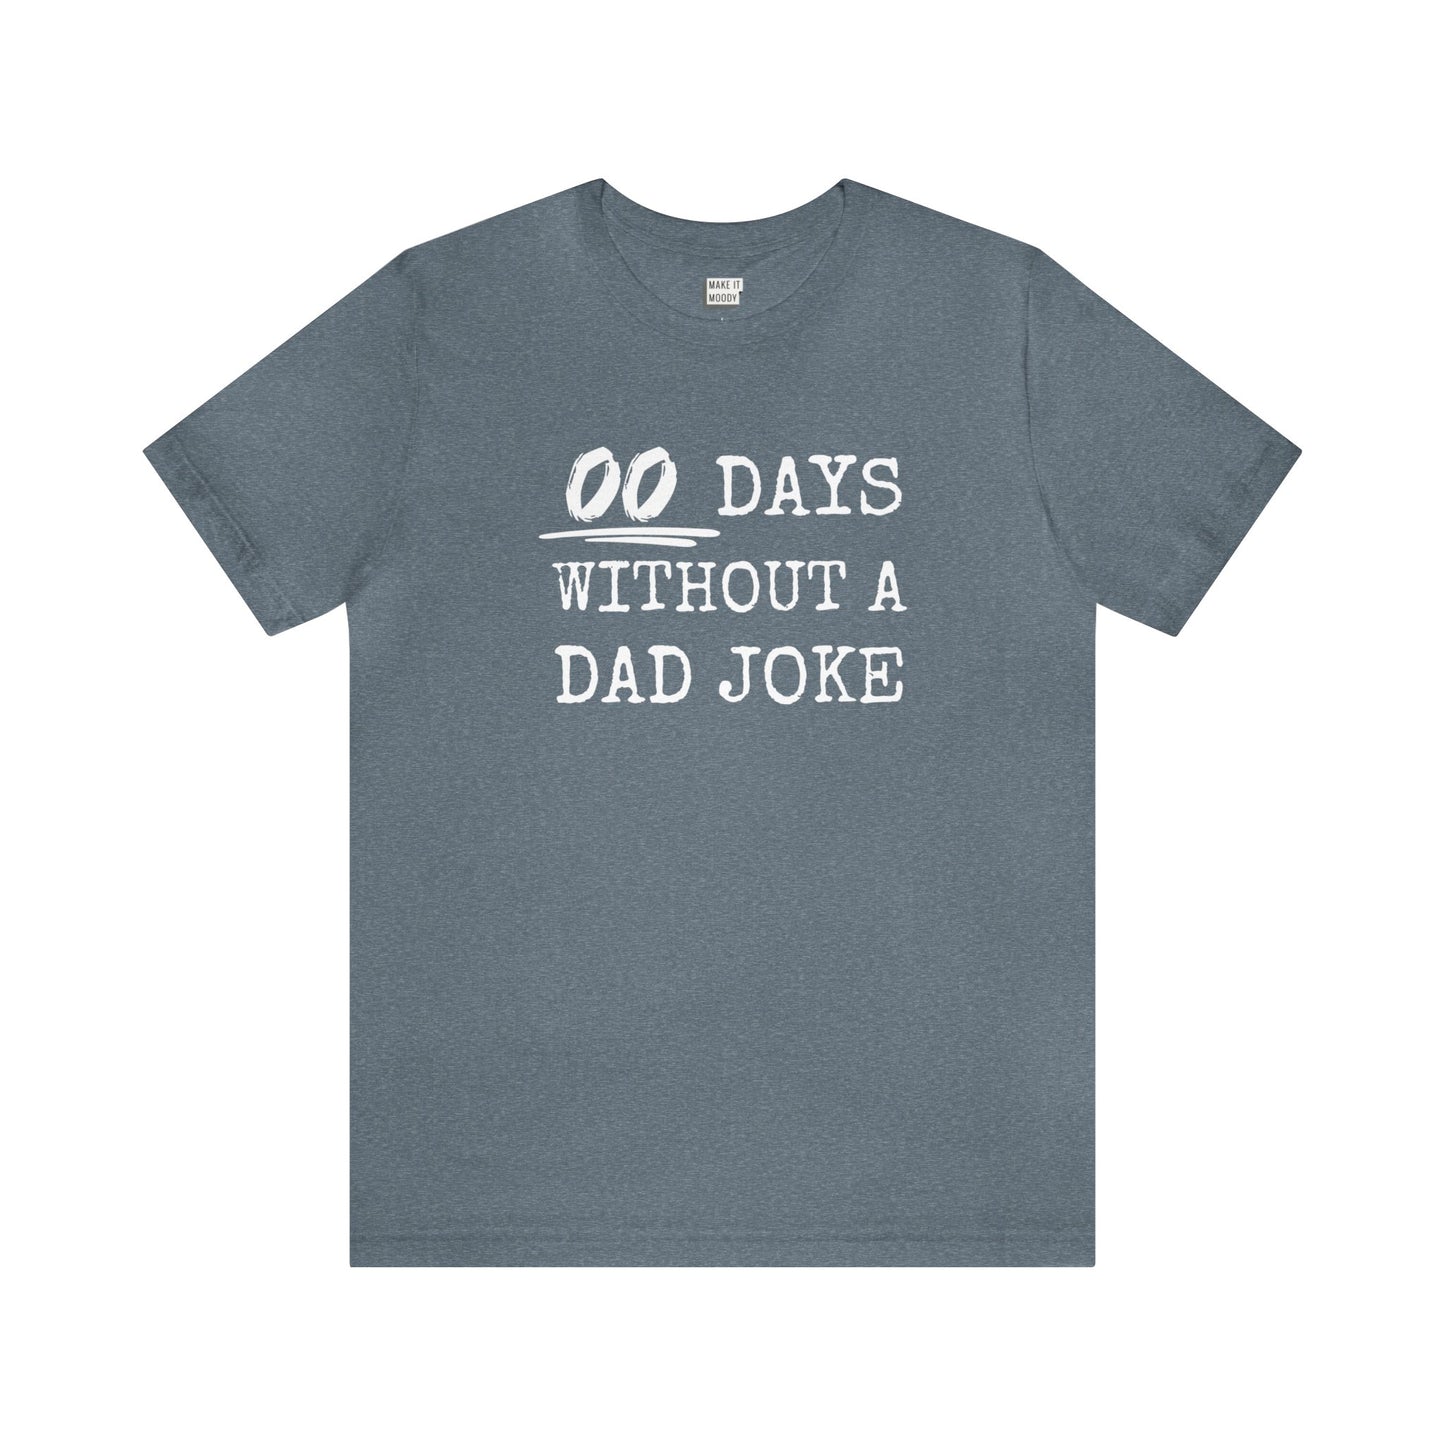 "00 Days Without a Dad Joke" Tee